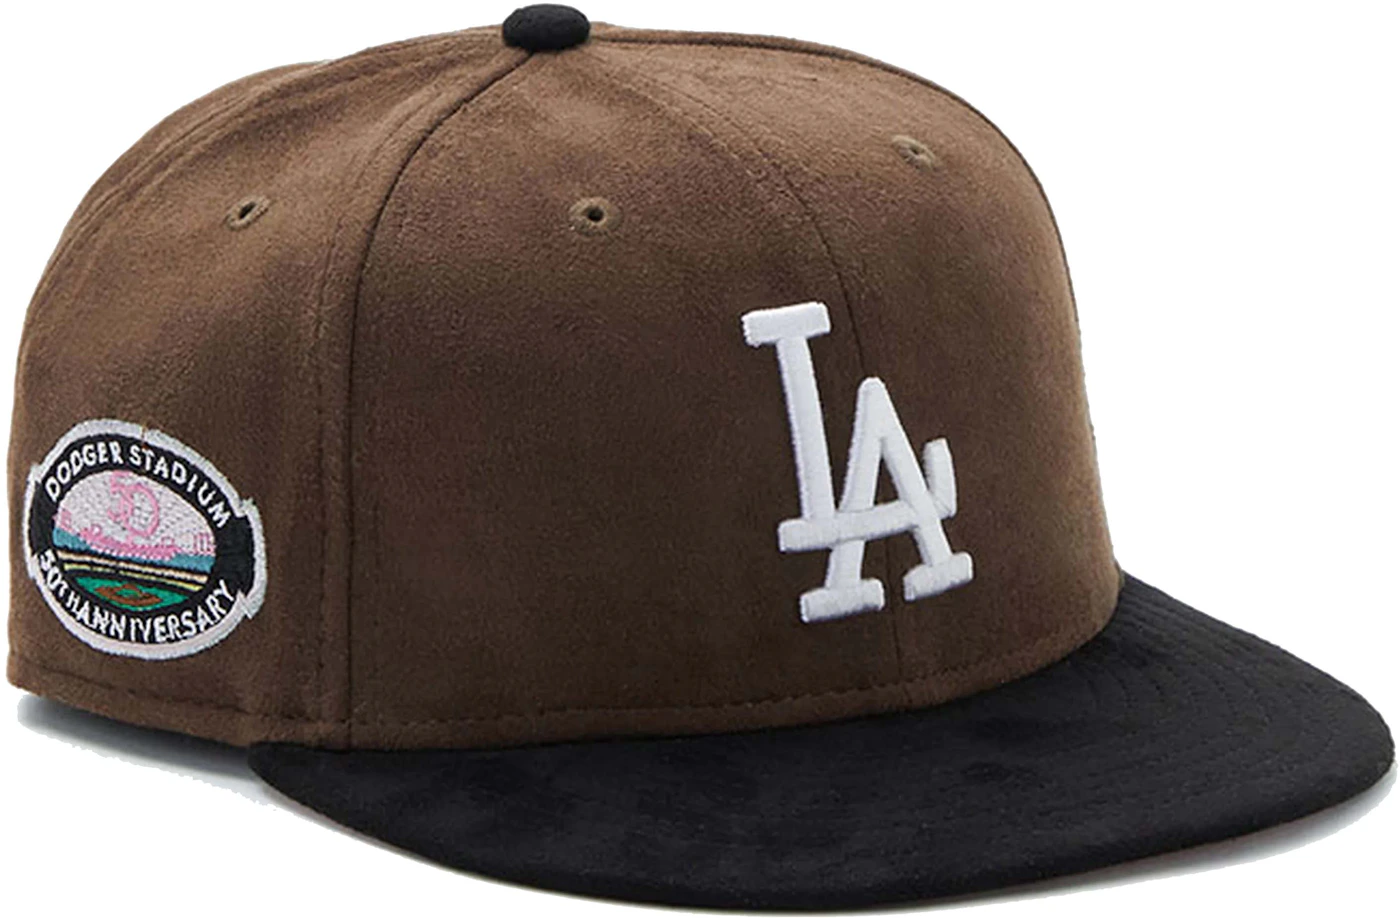 https://images.stockx.com/images/New-Era-x-PS-Reserve-x-Miki-Guerra-Suede-Dodgers-59Fifty-Fitted-Hat-Pink-Mocha.jpg?fit=fill&bg=FFFFFF&w=700&h=500&fm=webp&auto=compress&q=90&dpr=2&trim=color&updated_at=1673067976